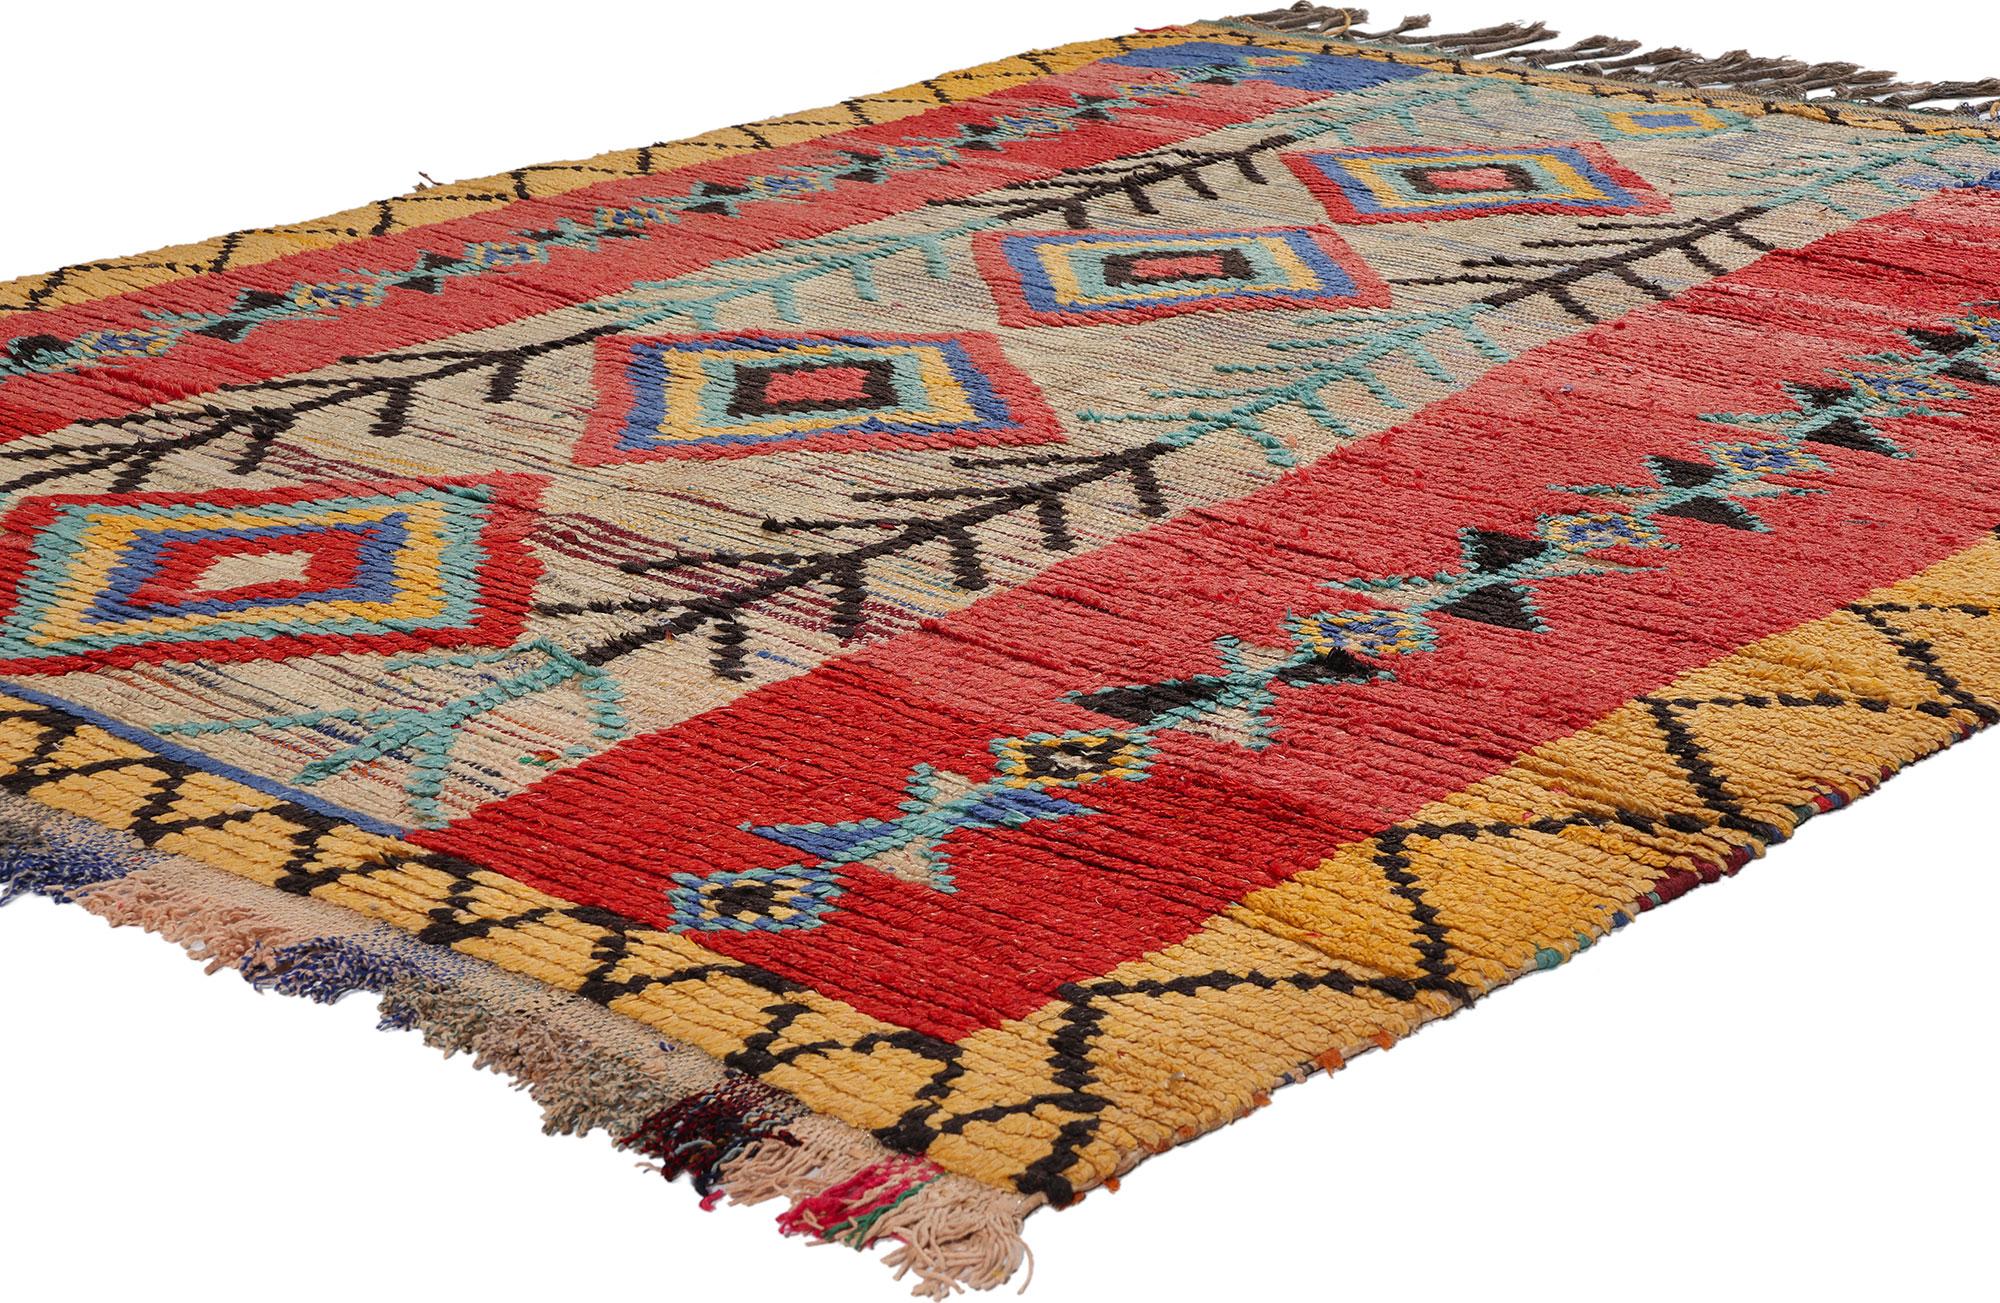 21803 Colorful Vintage Moroccan Azilal Rug, 05'02 x 07'00. Explore the abundant legacy of Azilal rugs flowing from the lively heart of the provincial capital in central Morocco, snugly cradled within the High Atlas Mountains. Renowned for their